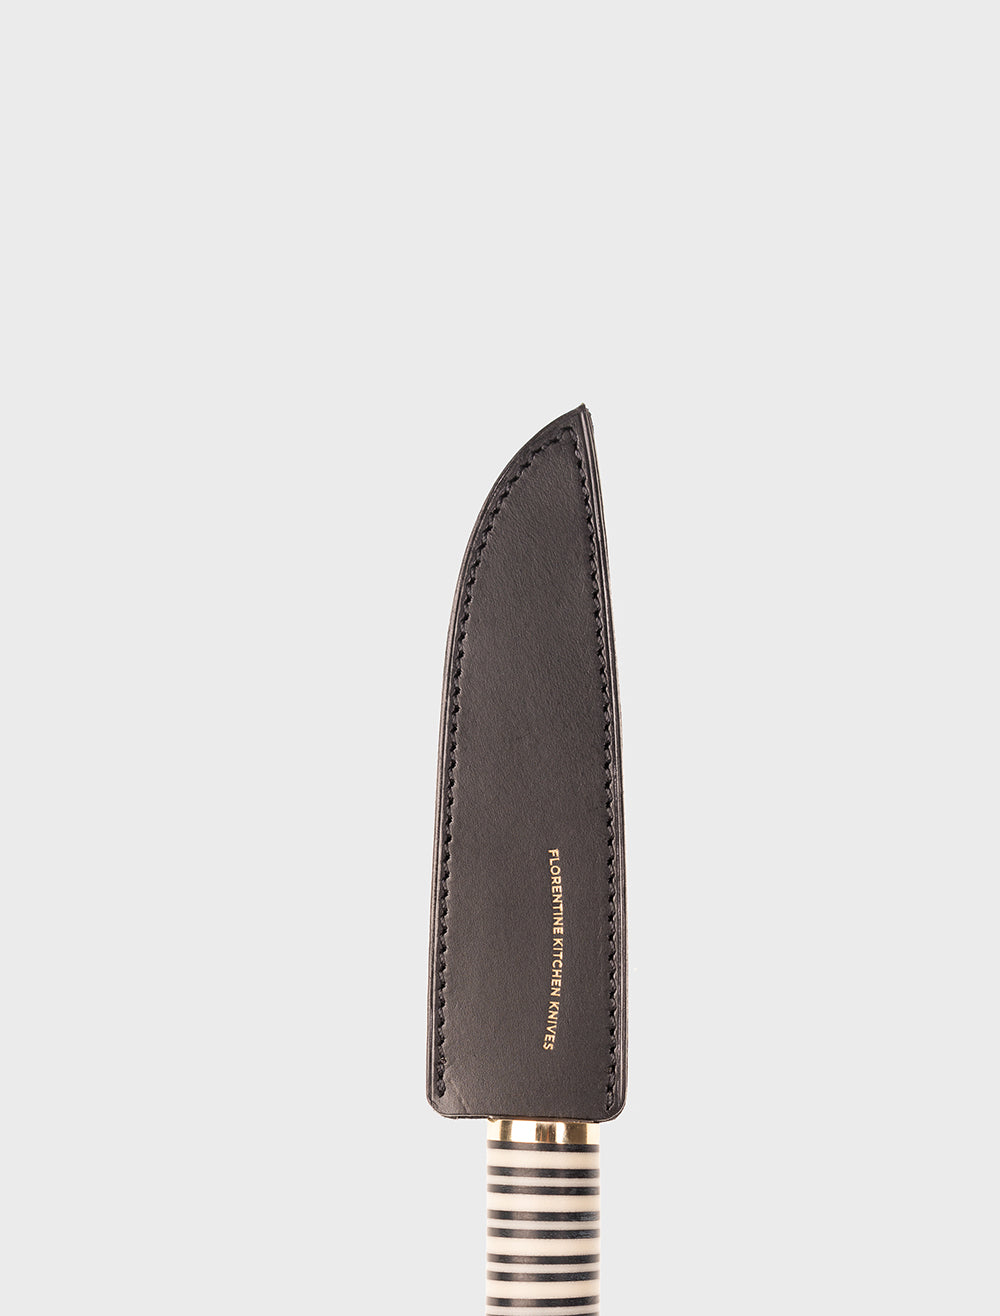 LEATHER BLADE GUARD FOR FLORENTINE PARING KNIVES